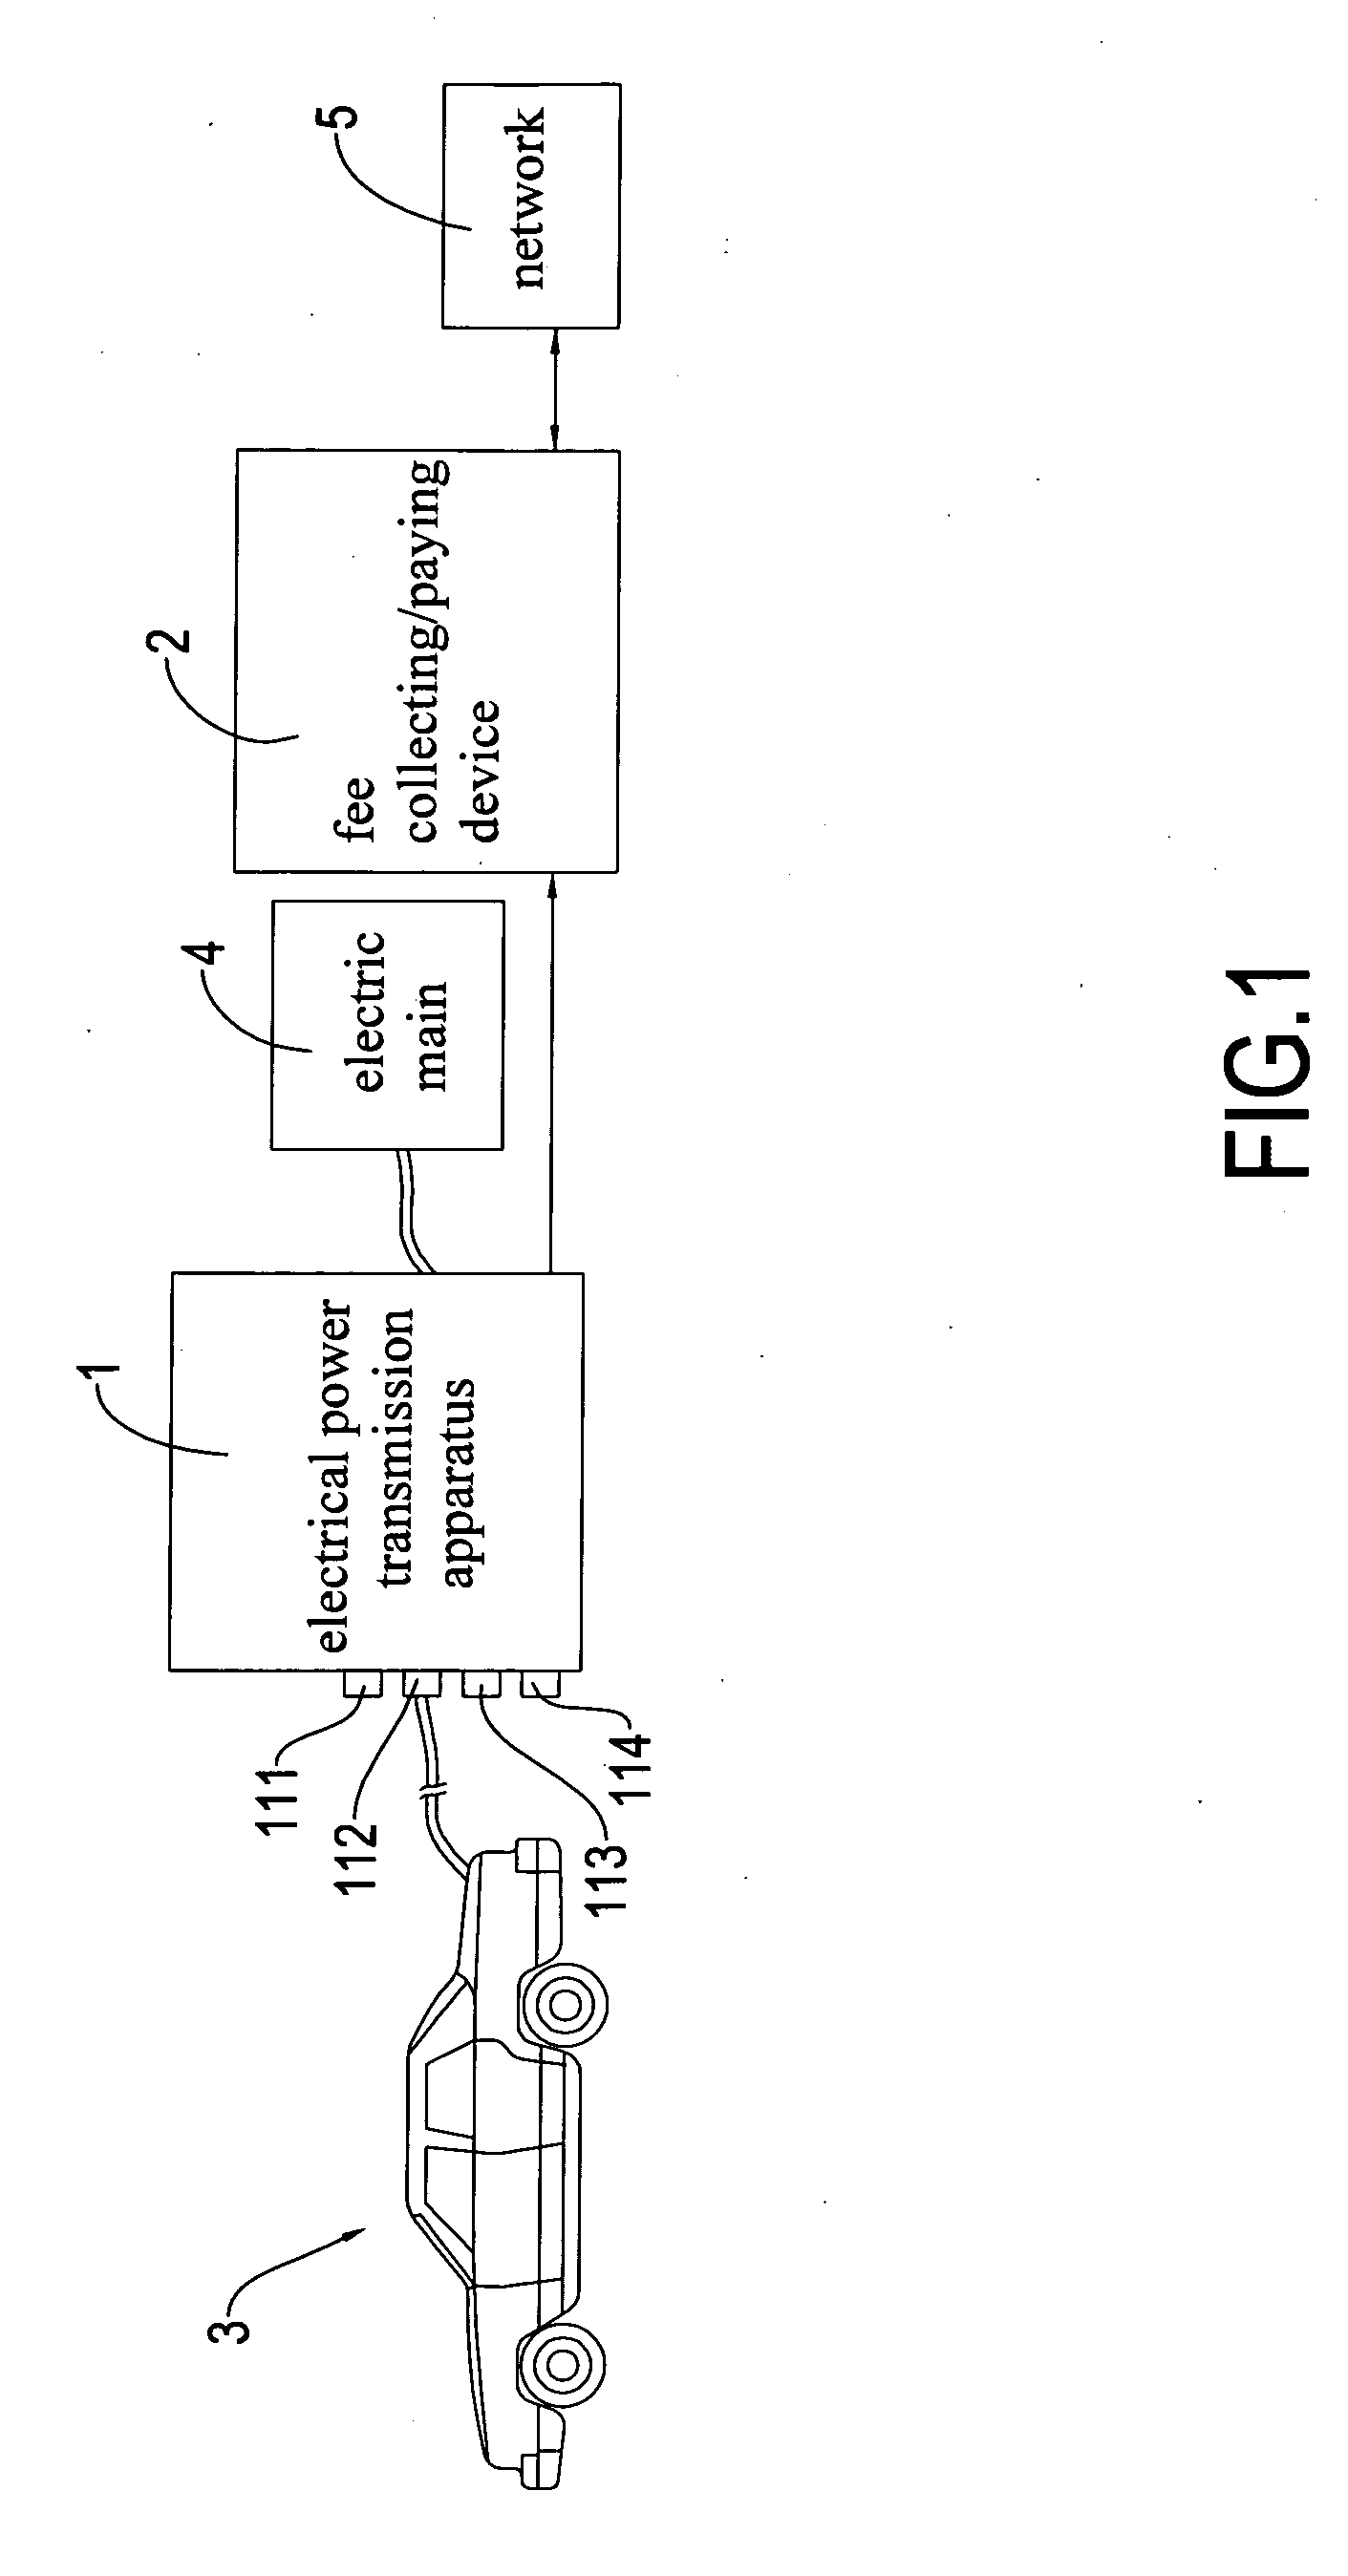 Electrical power transmission apparatus